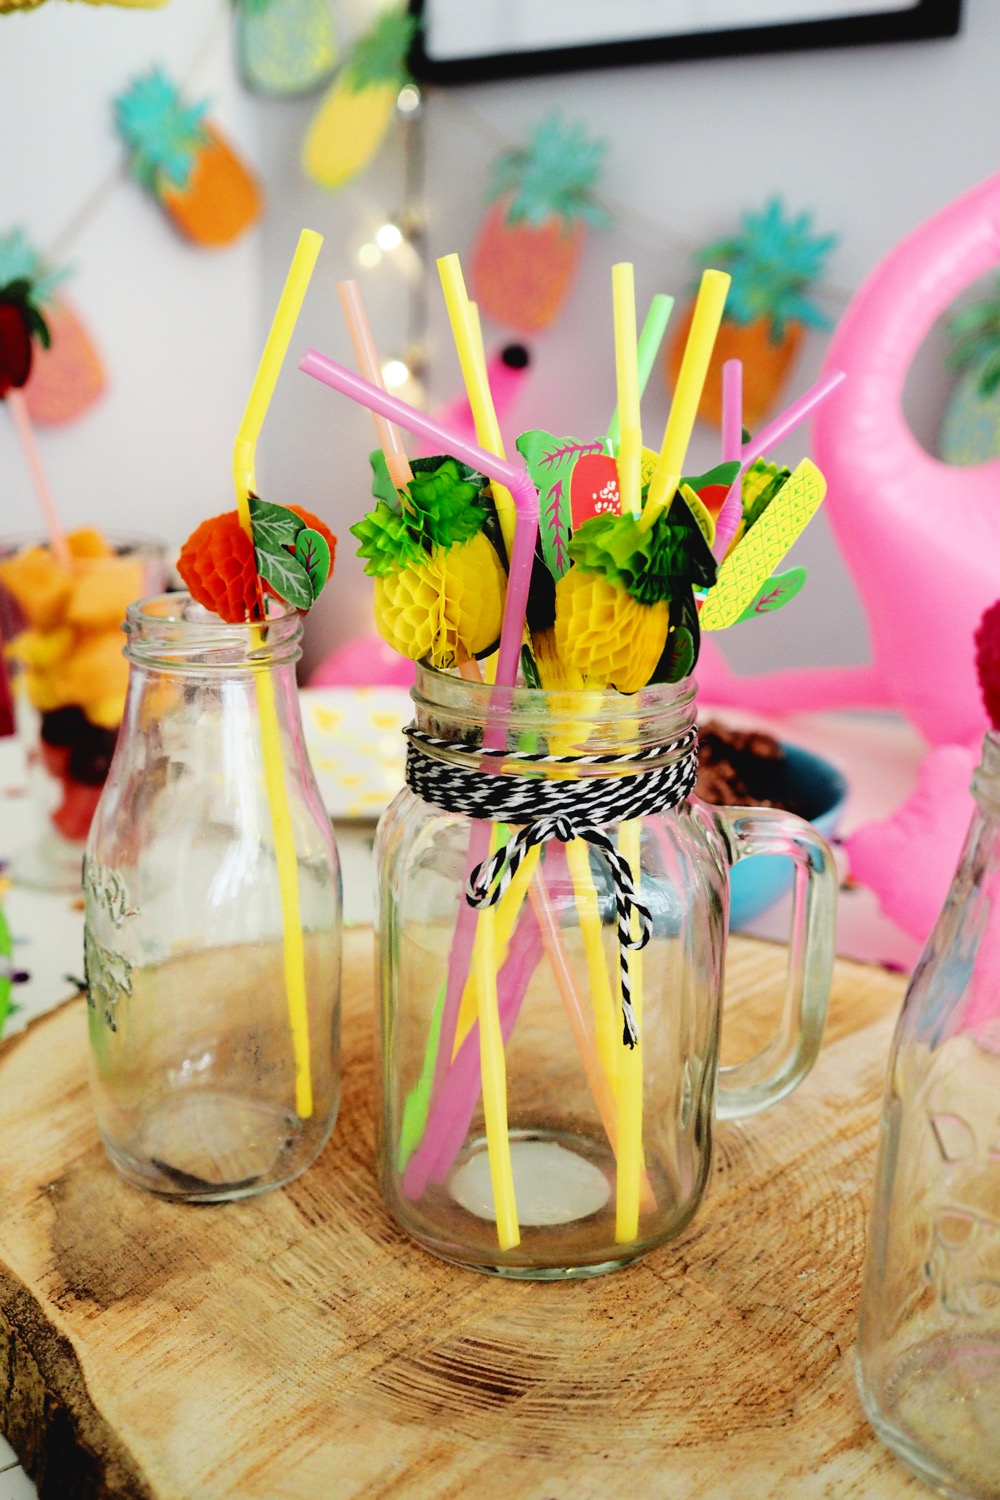 STYLING A KIDS SUMMER PARTY